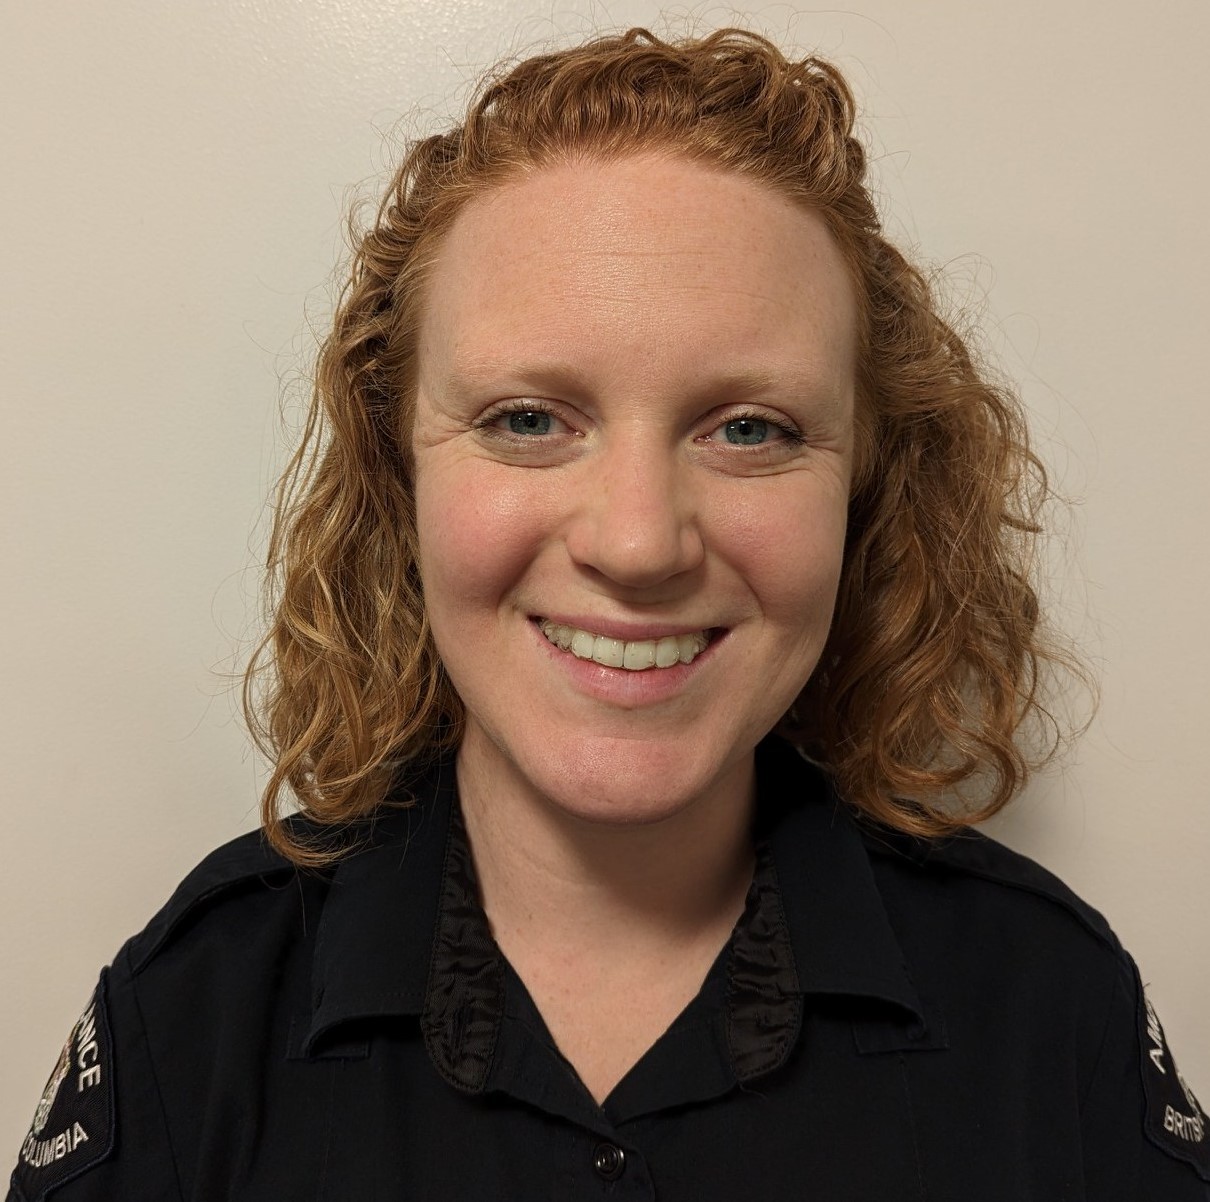 Photo of Emily Smith smiling in uniform